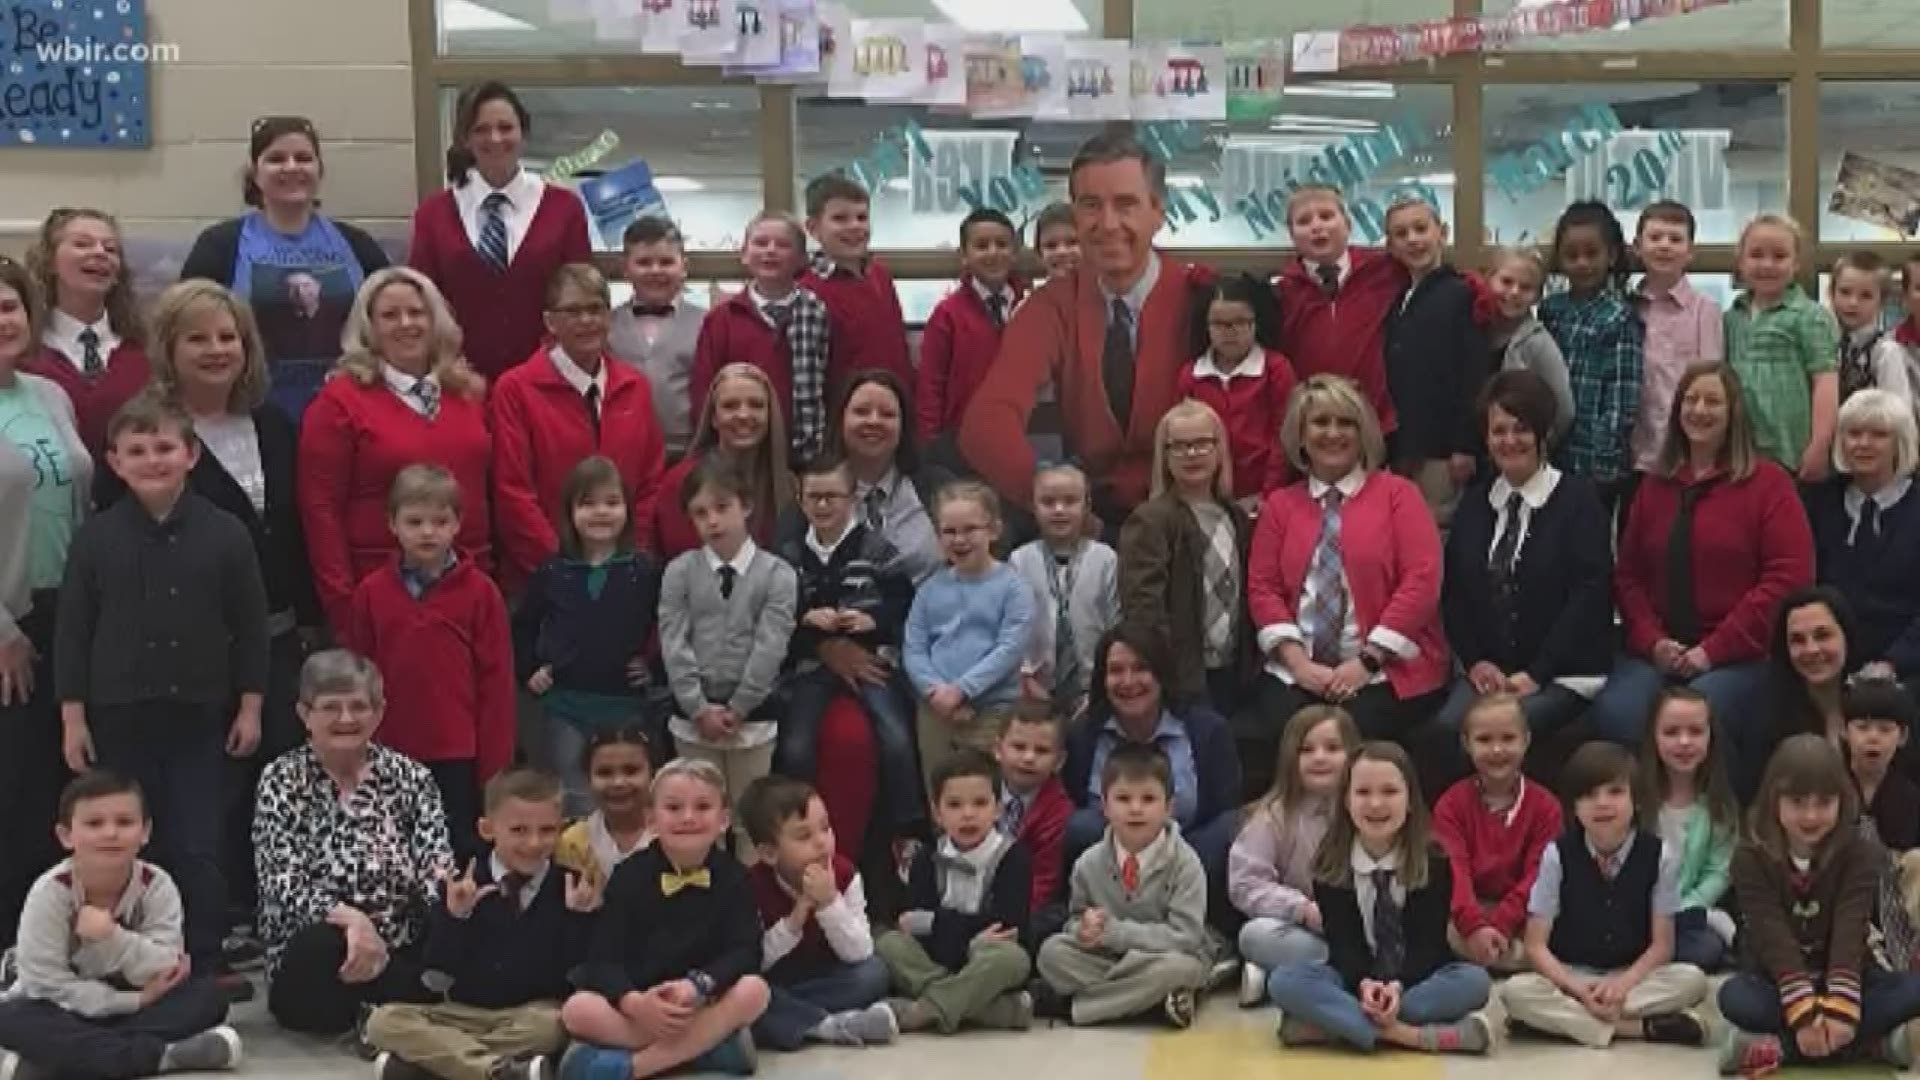 Thanks to the students and teachers at  Madisonville Primary School for sharing their picture of their 'Won't you be my neighbor' day' on March 20. Fred Rogers would have turned 91 this year. March 21, 2019-4pm.